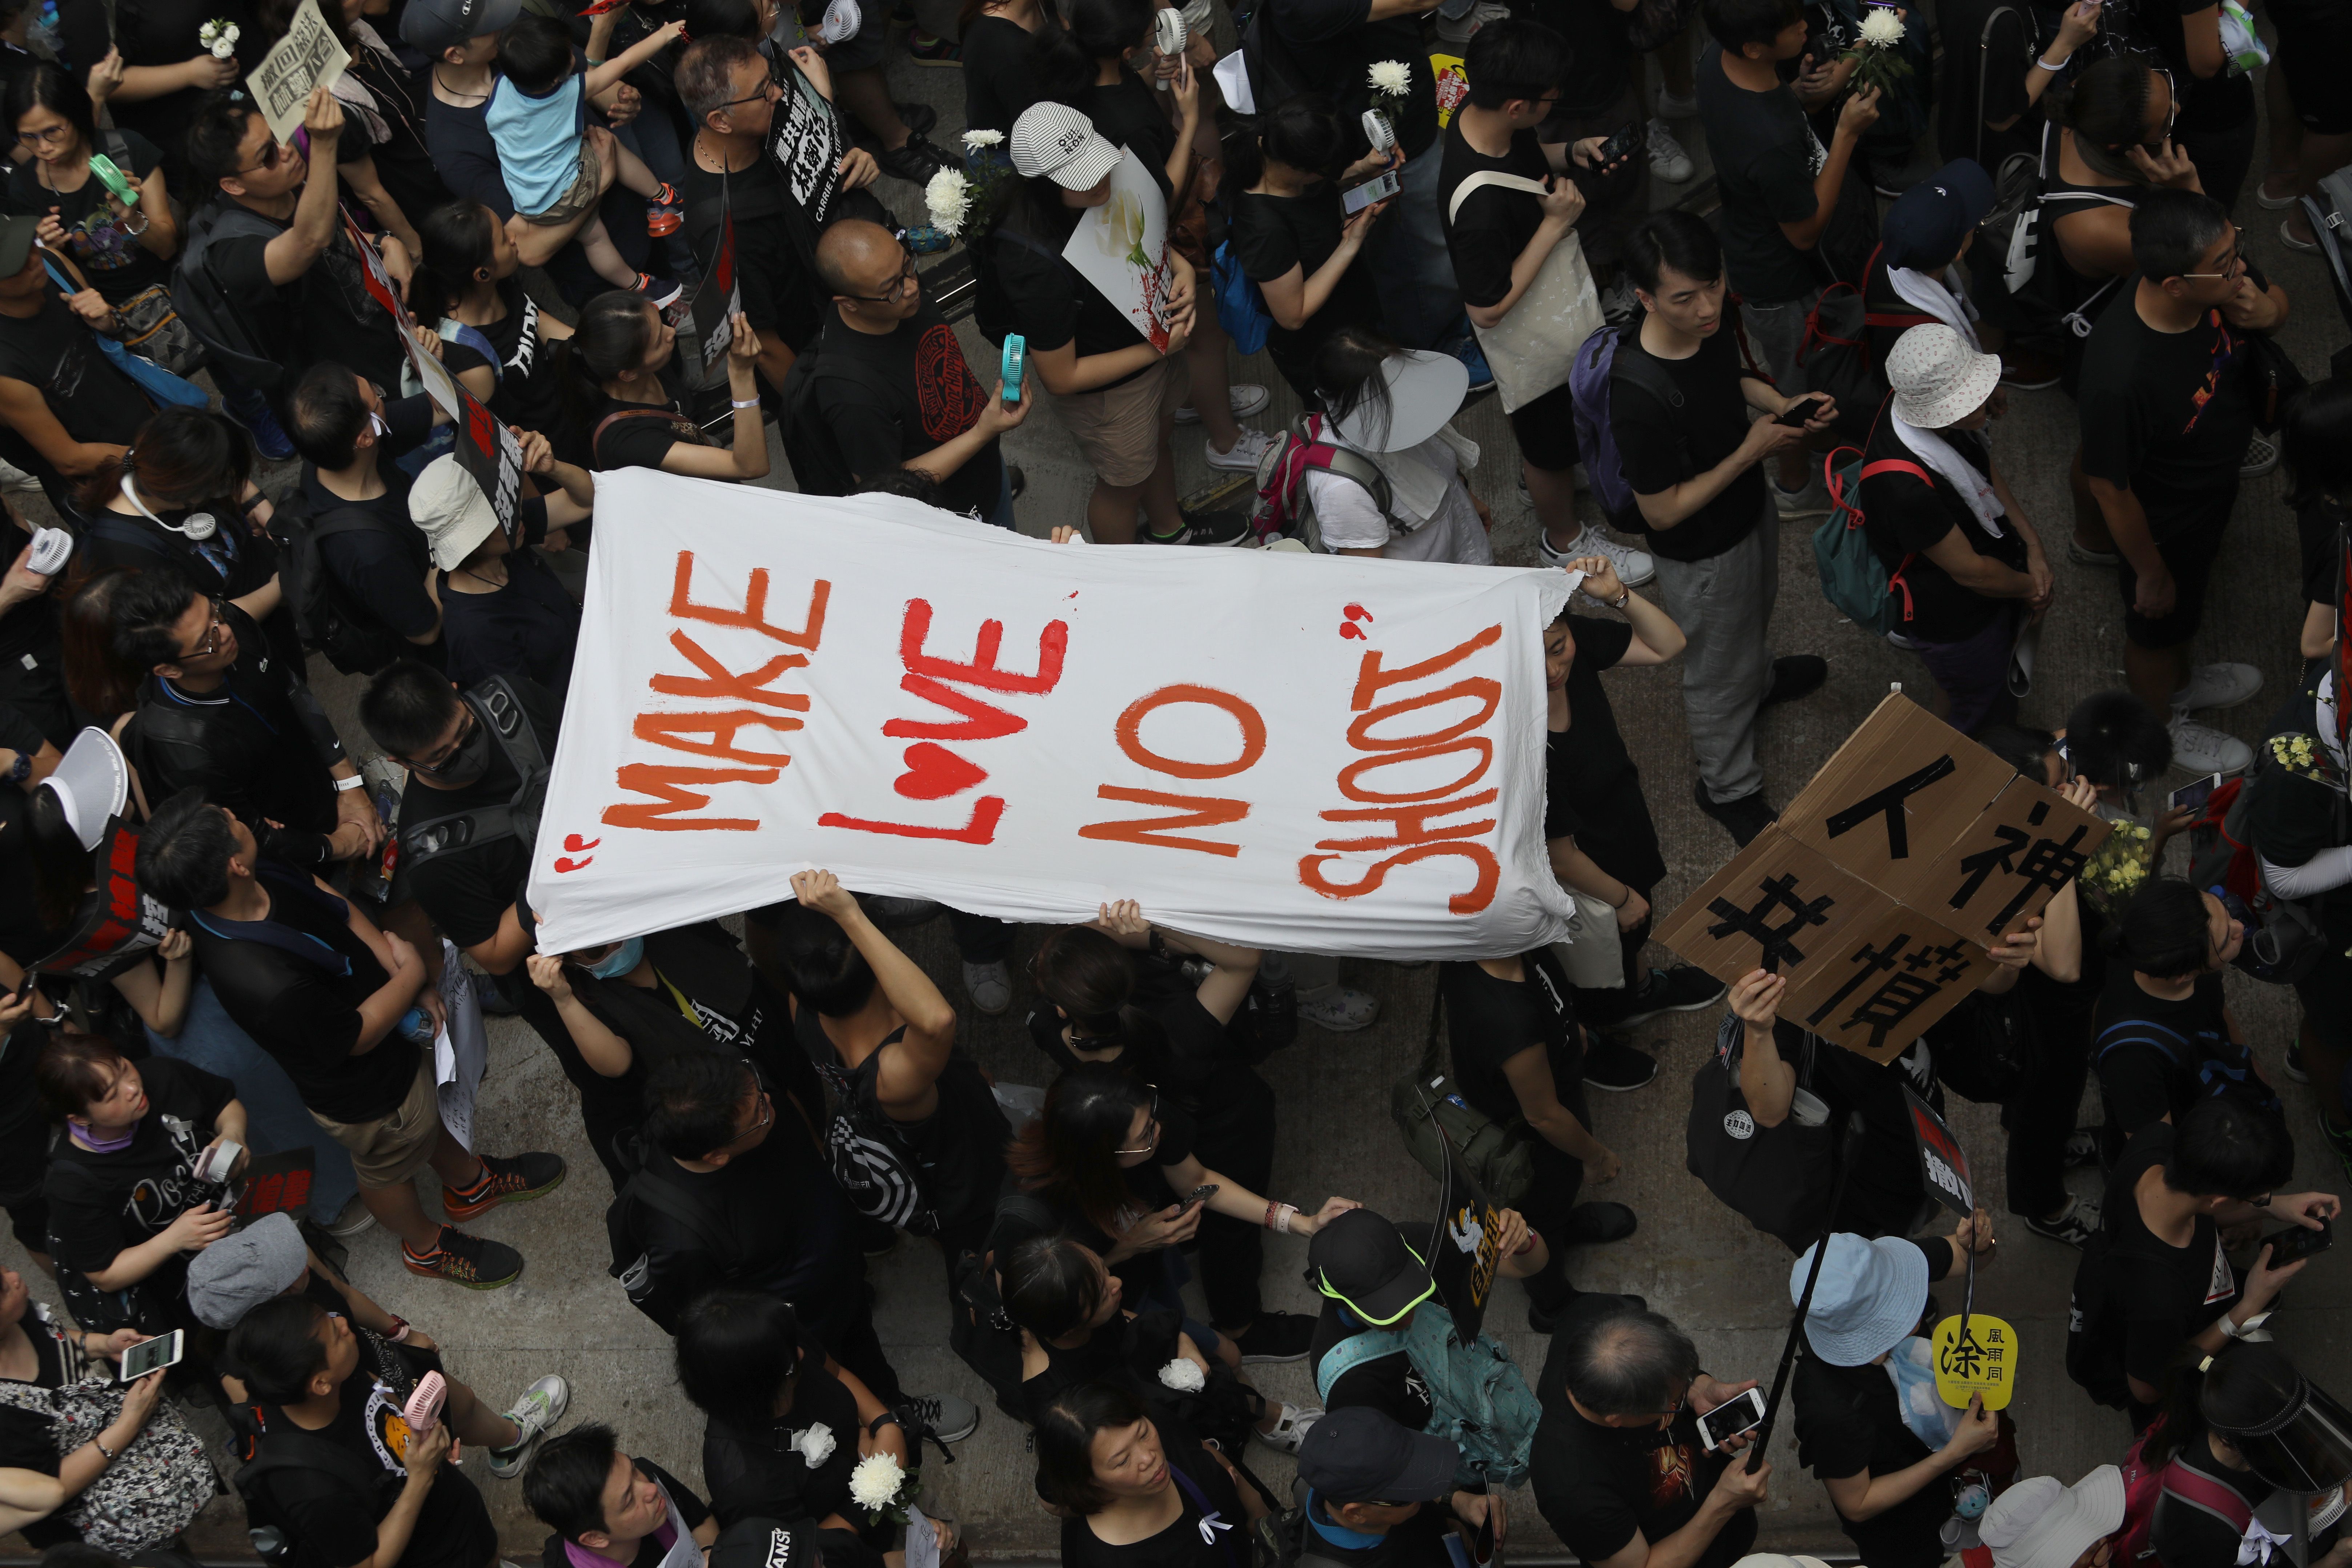 People carry a banner reading "Make love no shoot".